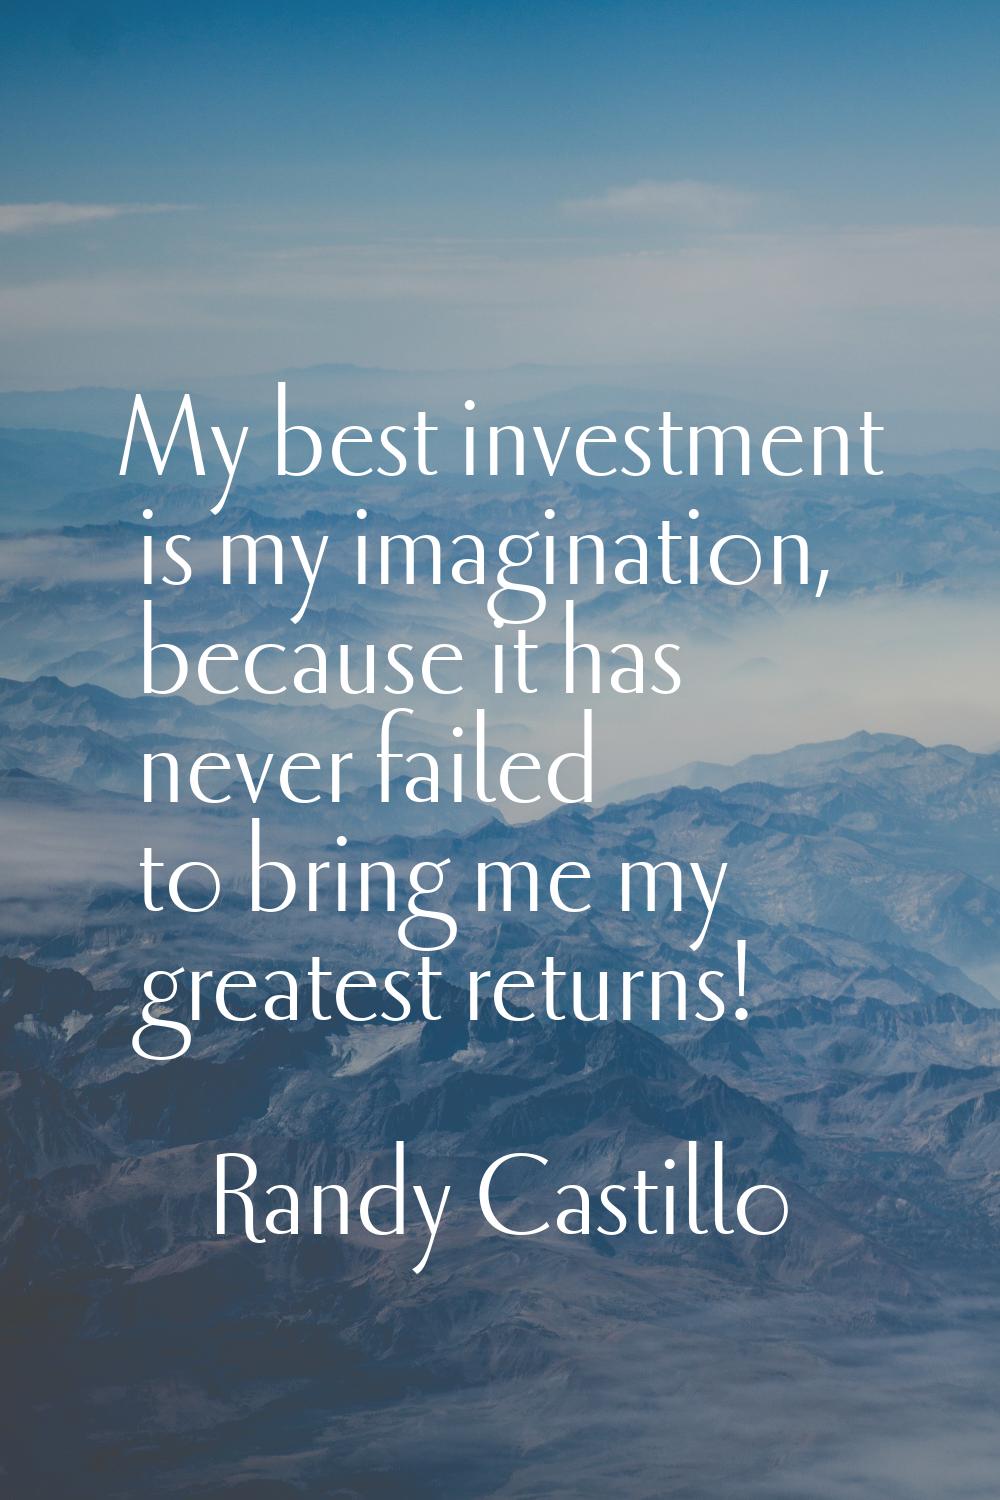 My best investment is my imagination, because it has never failed to bring me my greatest returns!